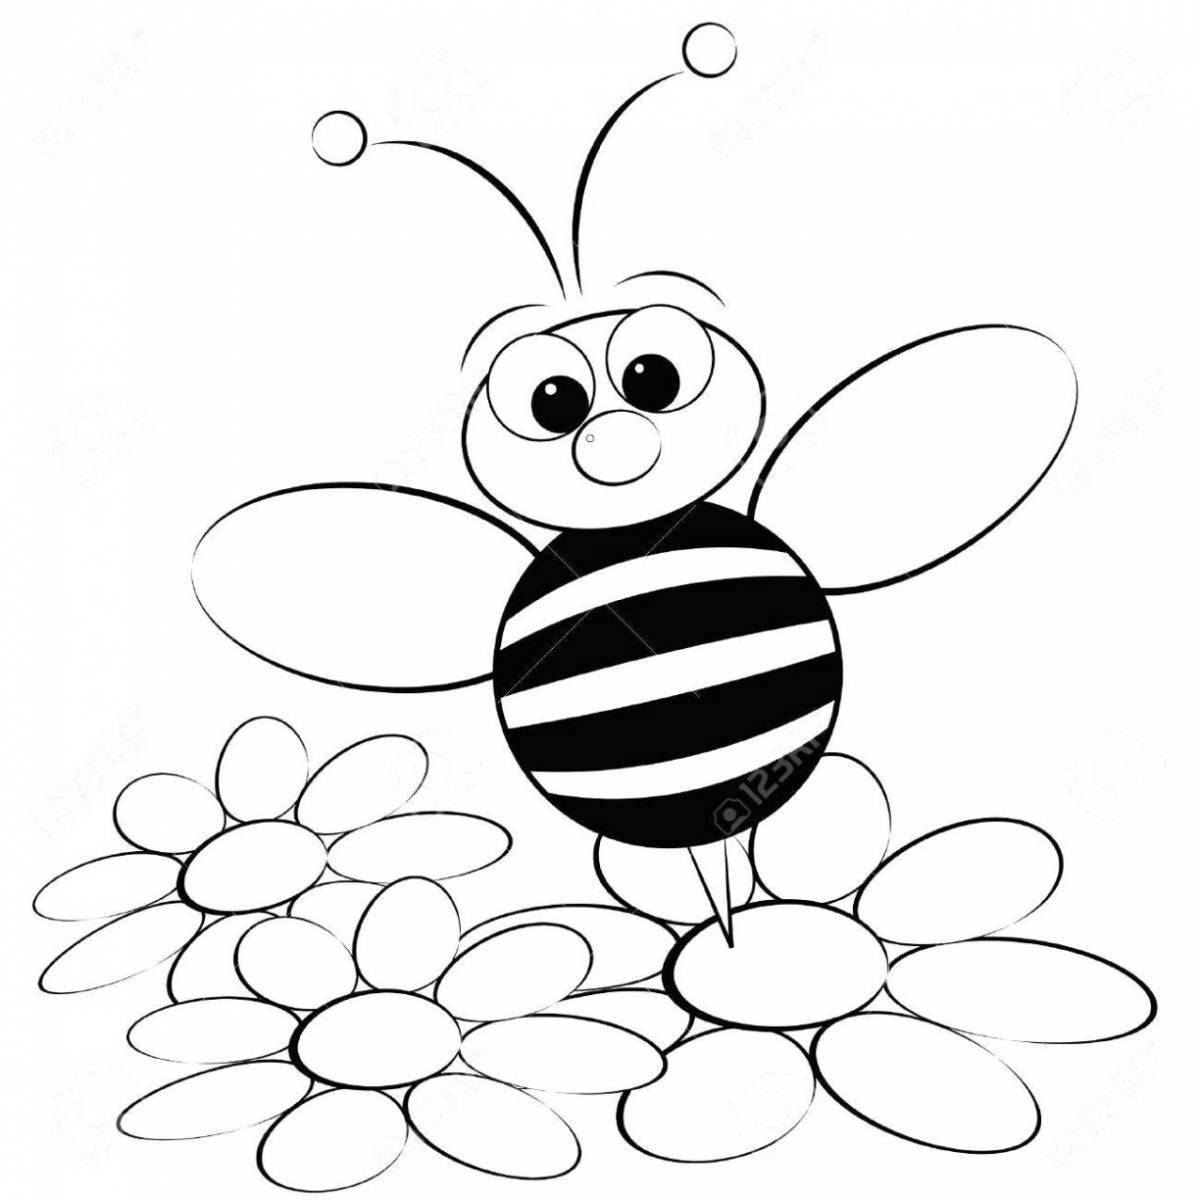 Coloring book nice bee for children 3-4 years old